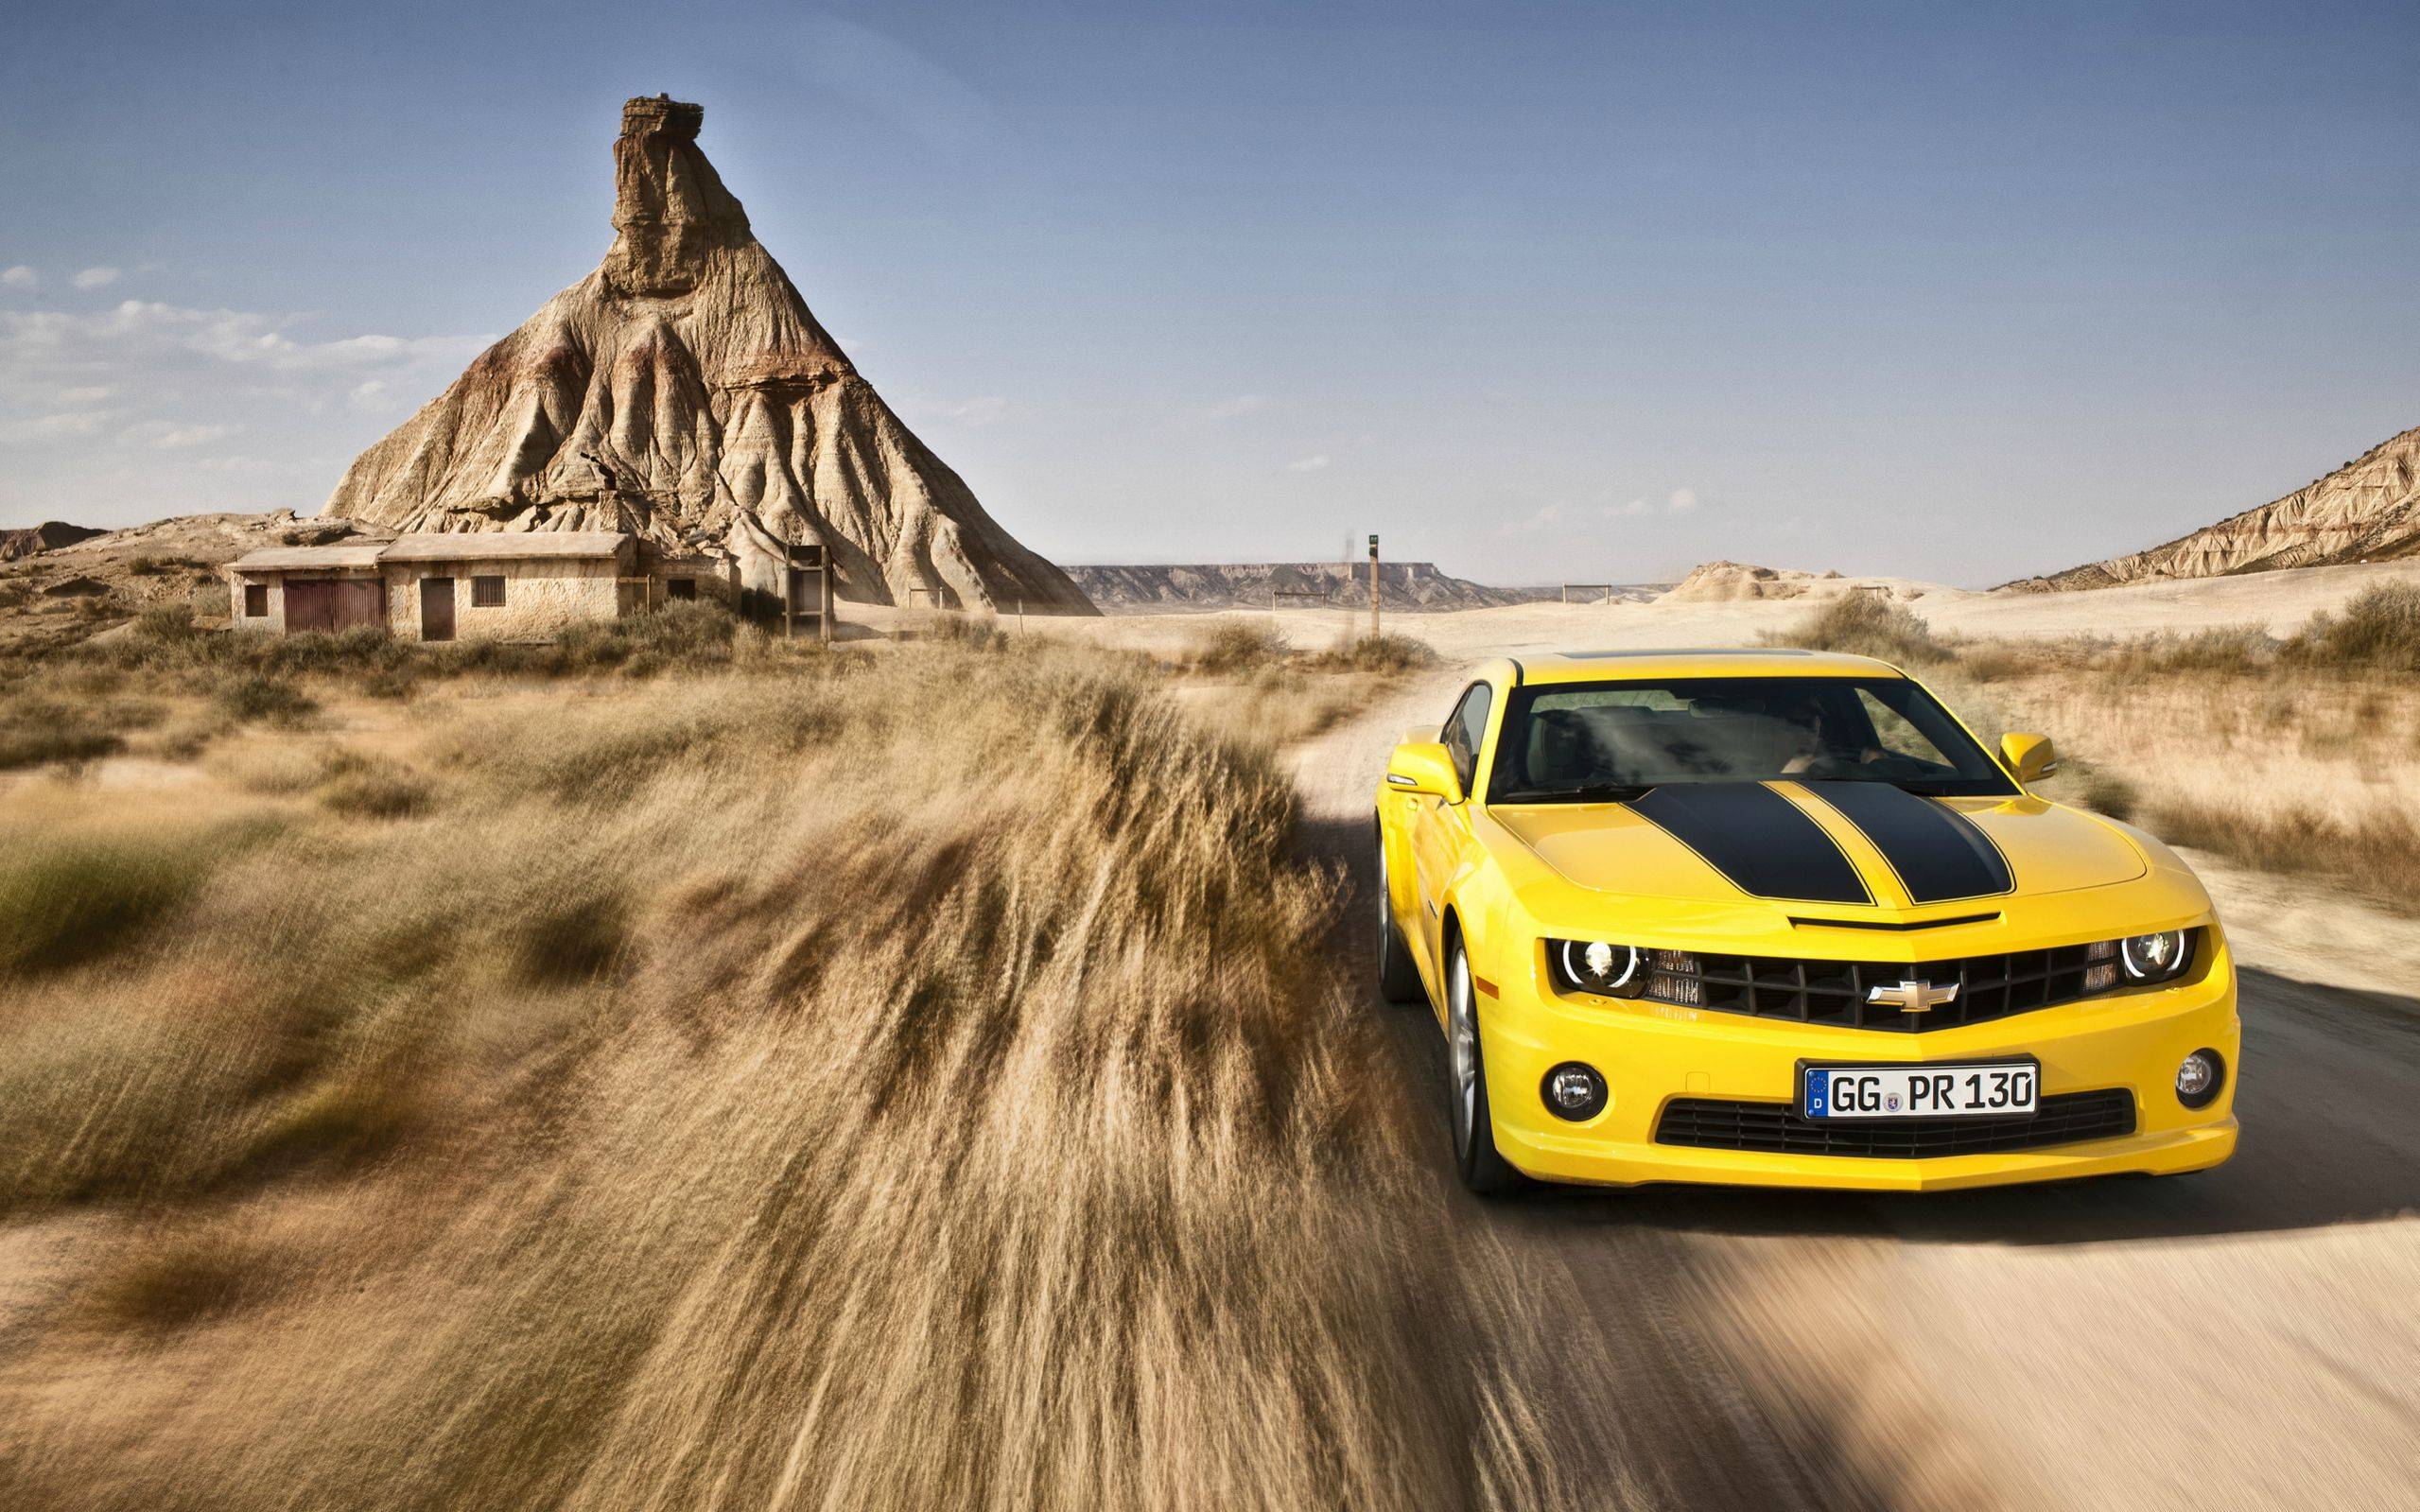 Widescreen Ford Mustang Desert Road American Car With Cars